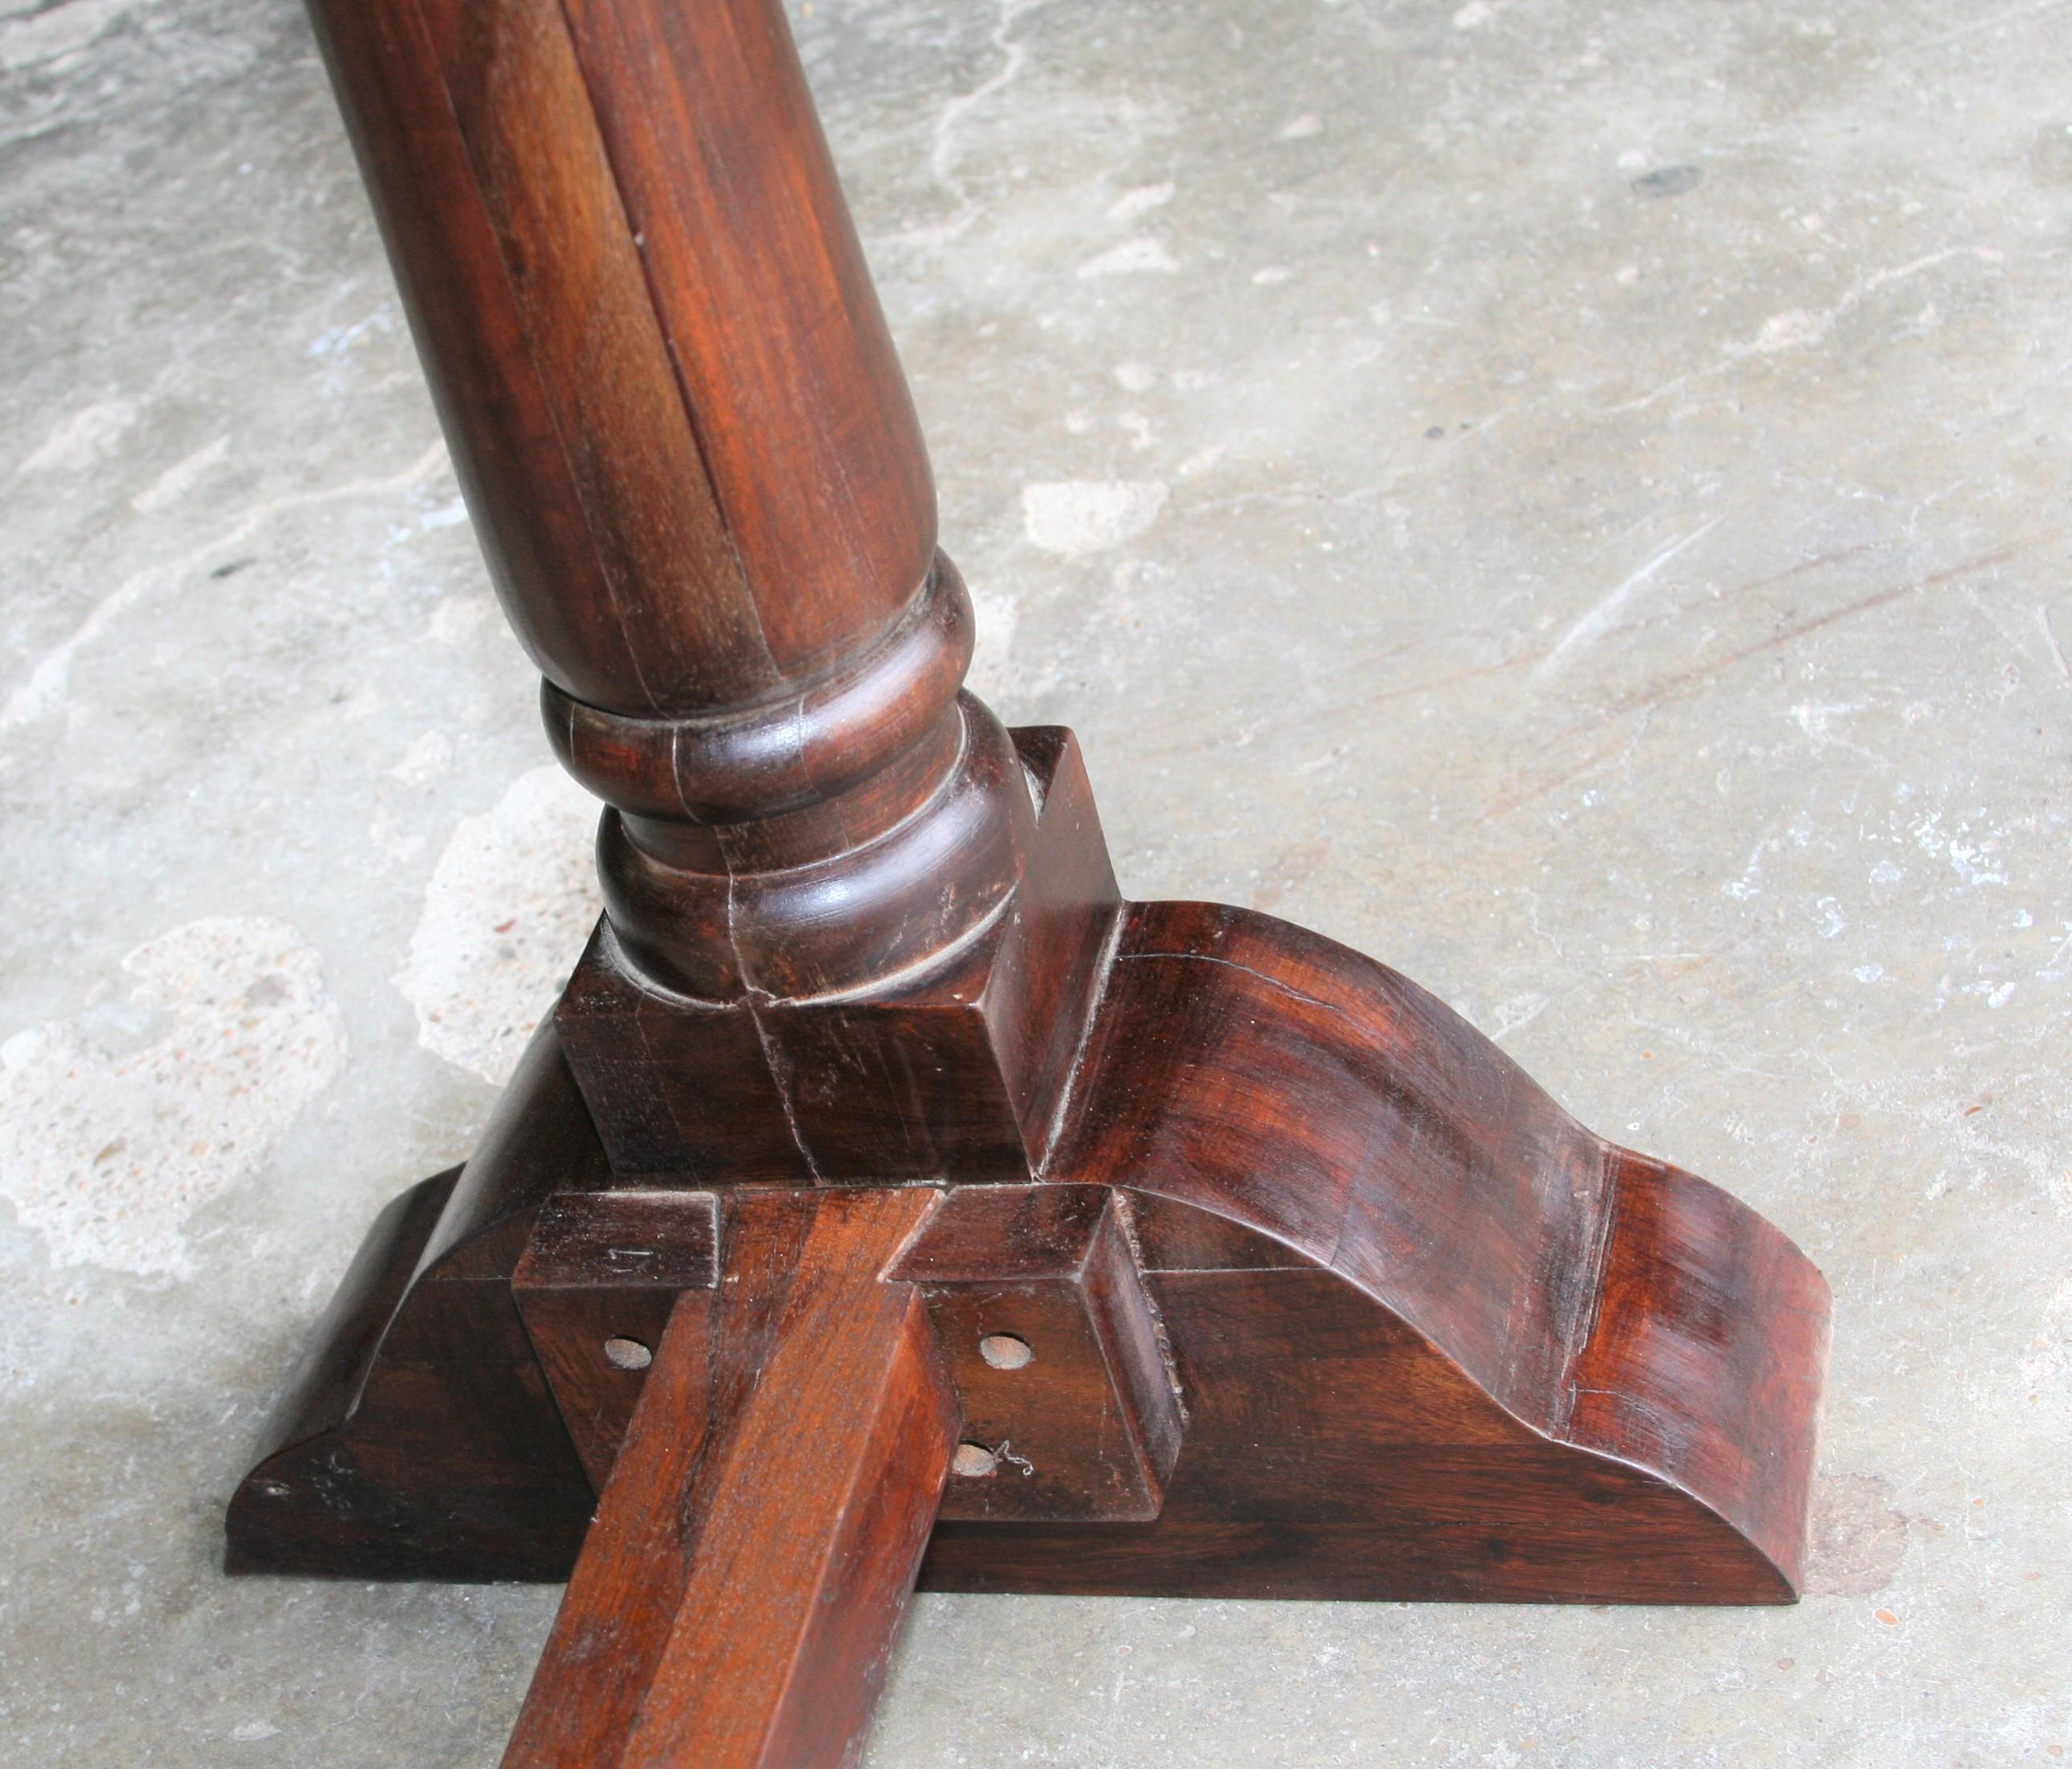 Hand-Crafted Pair of Mid-Century Modern Solid Teak Wood Console Tables from a Church For Sale